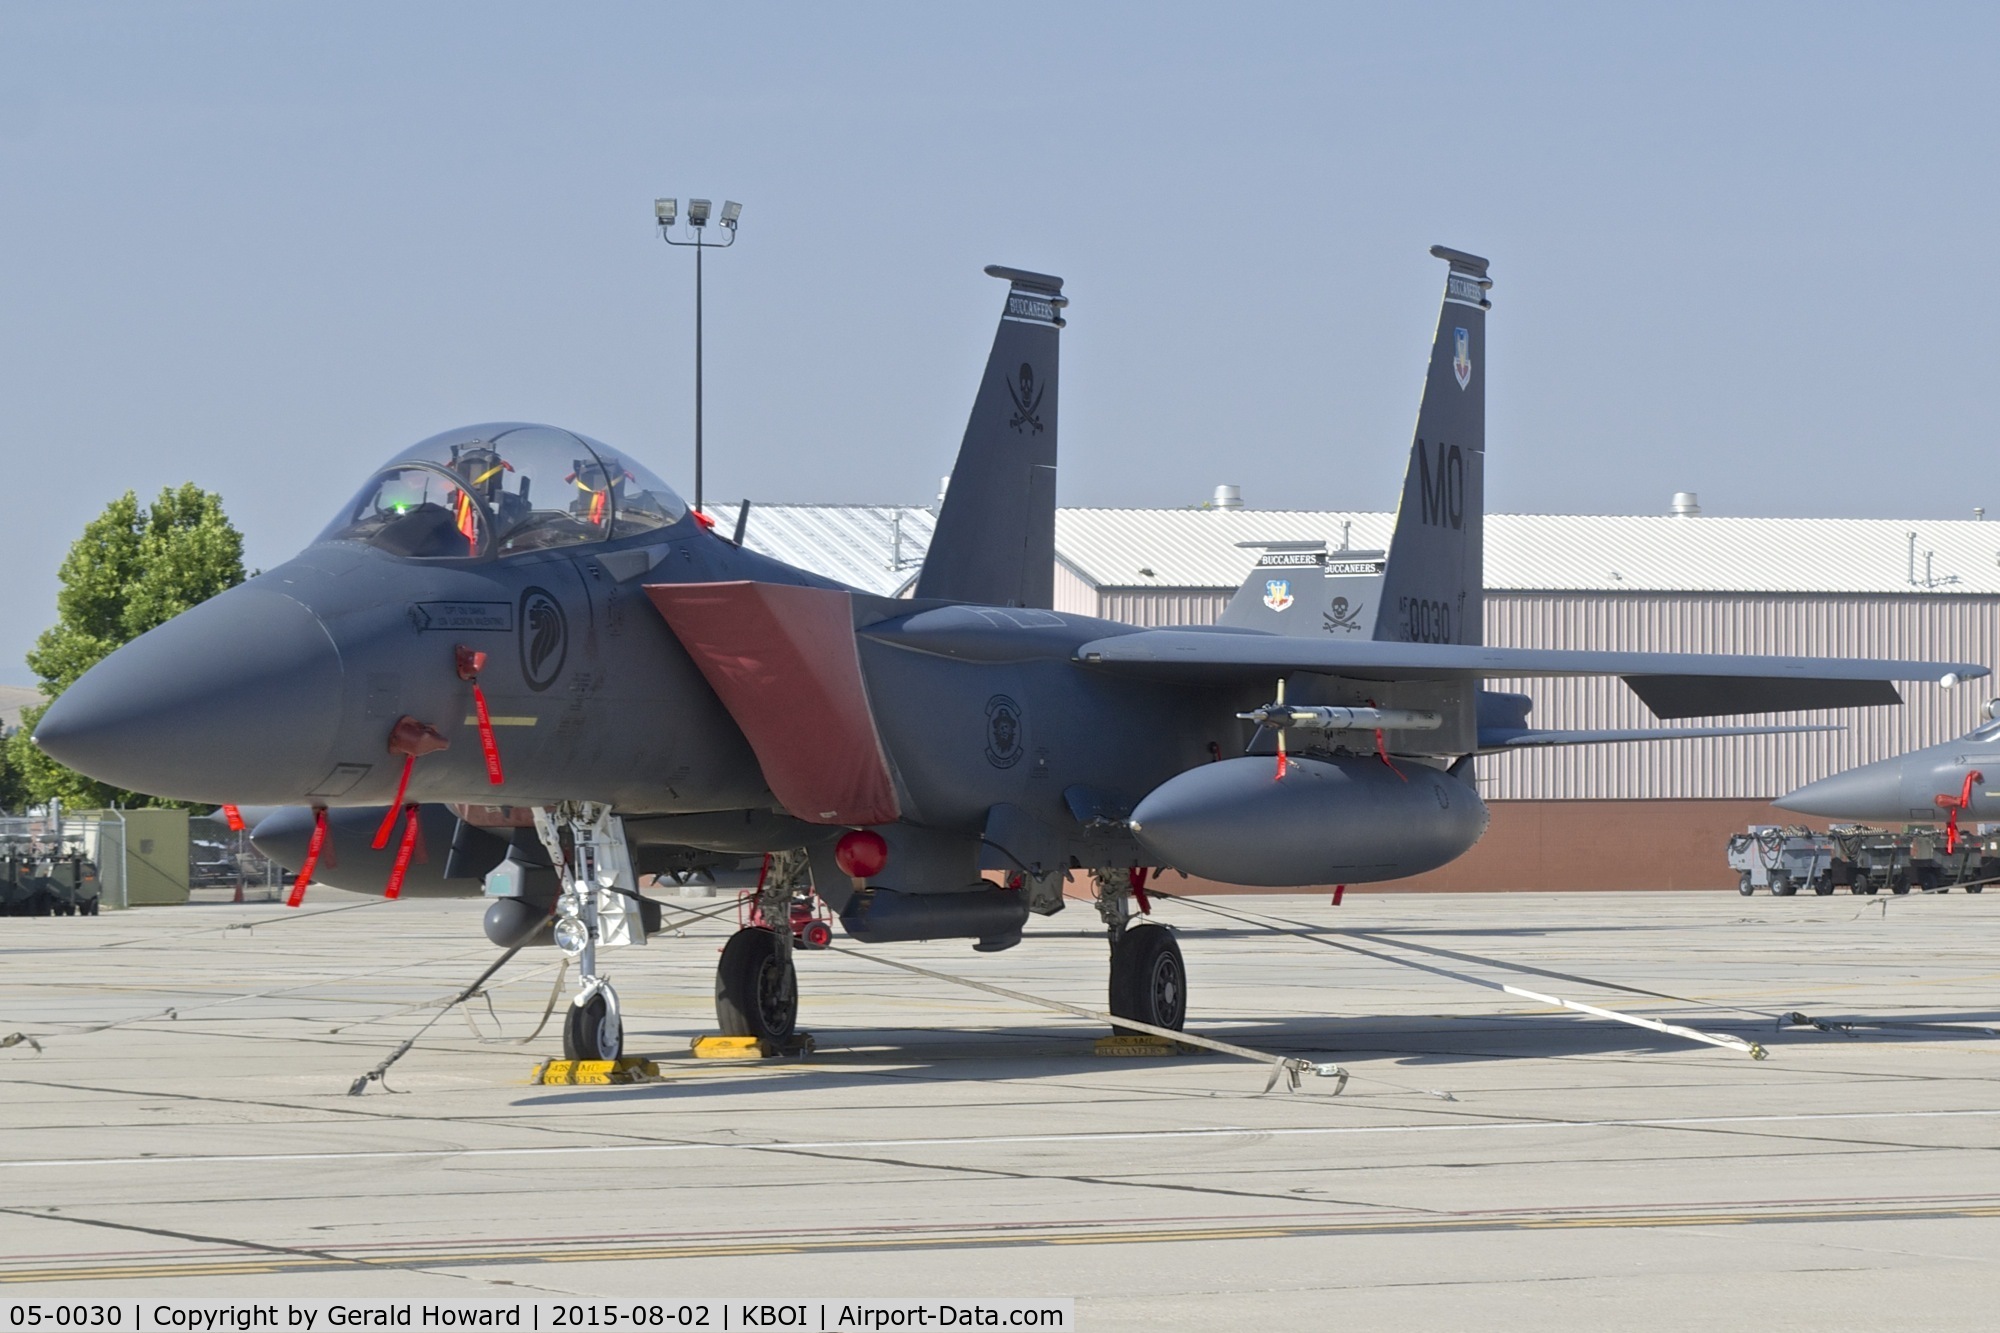 05-0030, 2005 Boeing F-15SG Strike Eagle C/N SG30, Parked on Idaho ANG ramp. 428th Fighter Sq. 